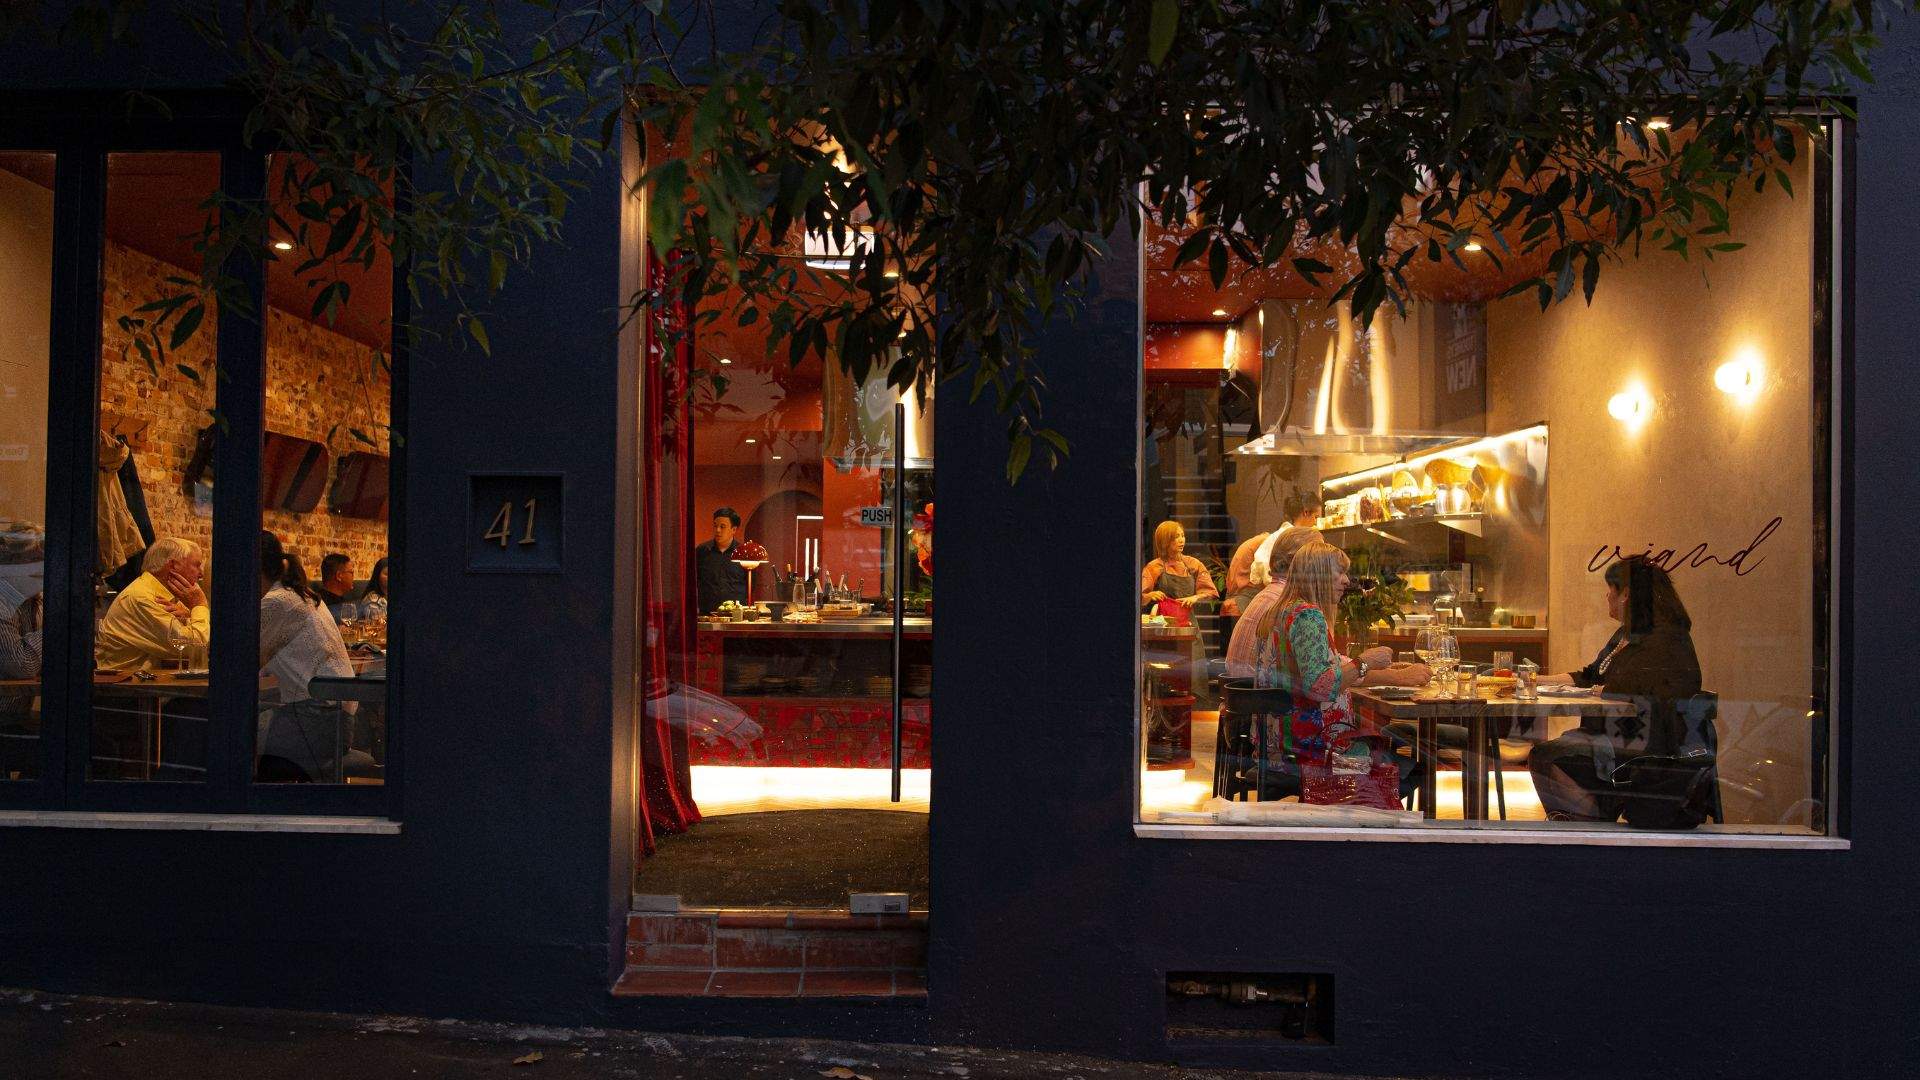 A view of Viand — one of the best thai restaurants in Sydney - from the street, looking through the windows at night